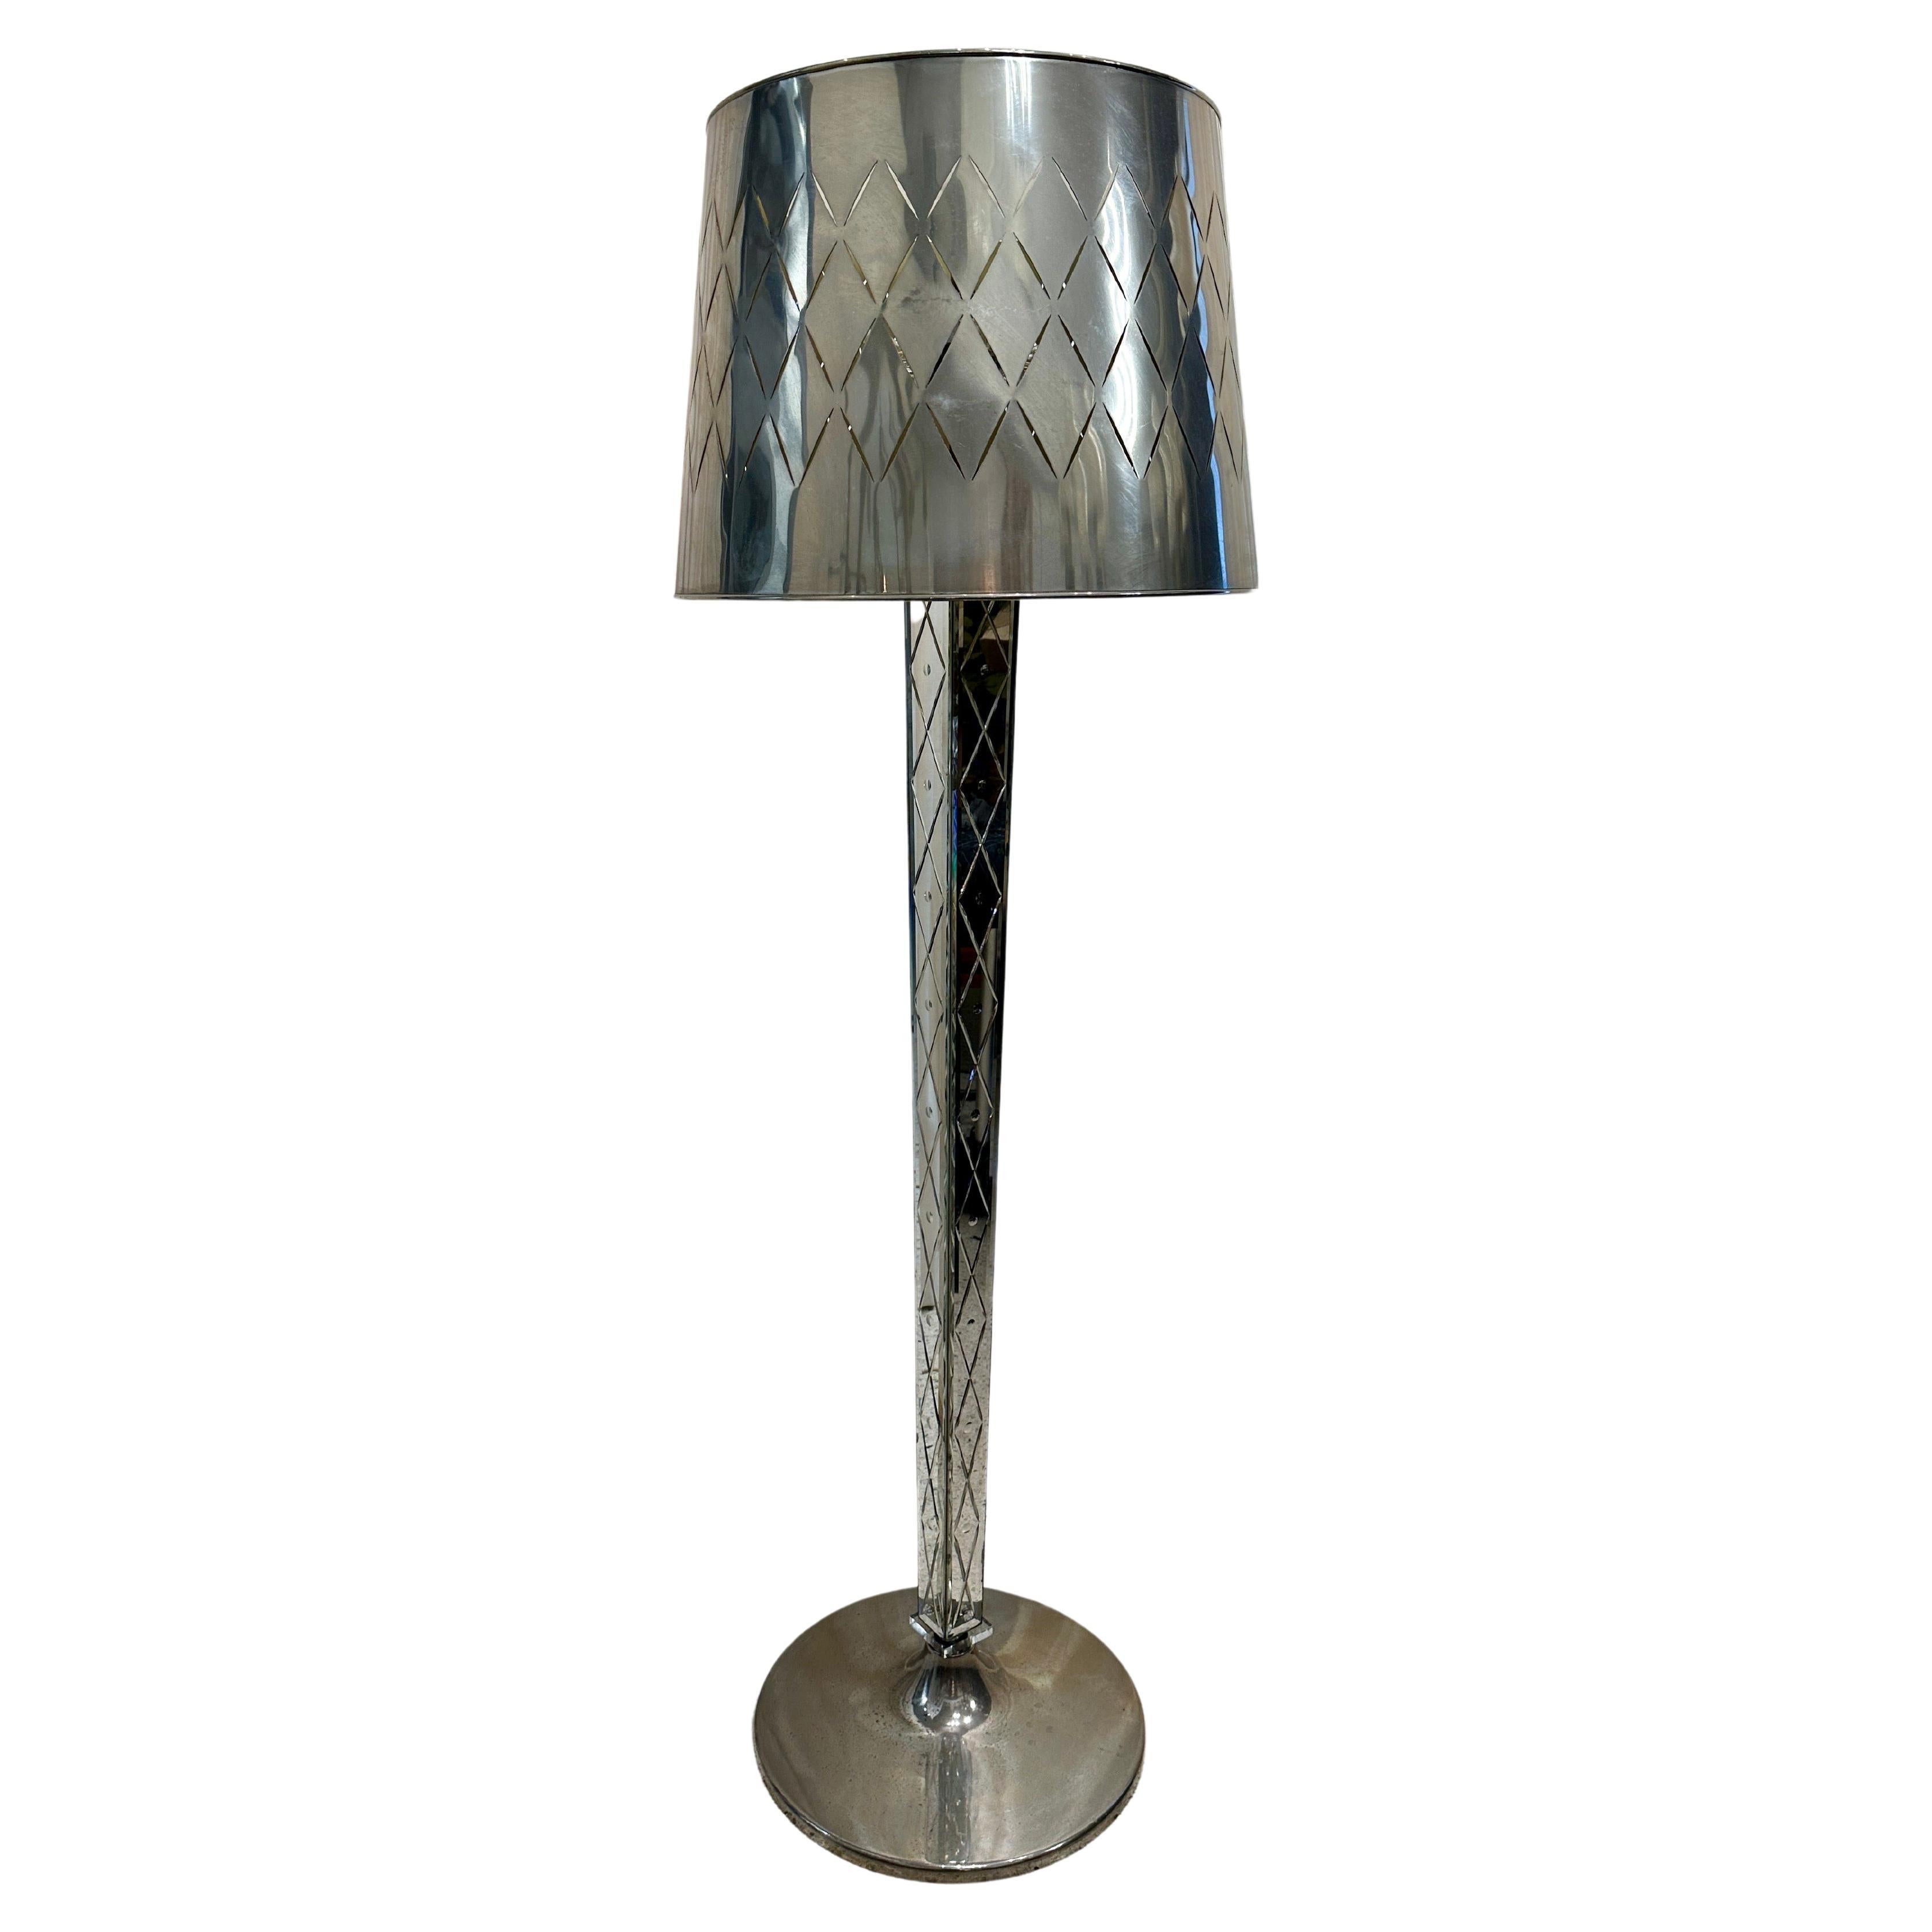 RARE Philippe Starck Etched Mirror Floor Lamp - Delano Hotel South Beach For Sale